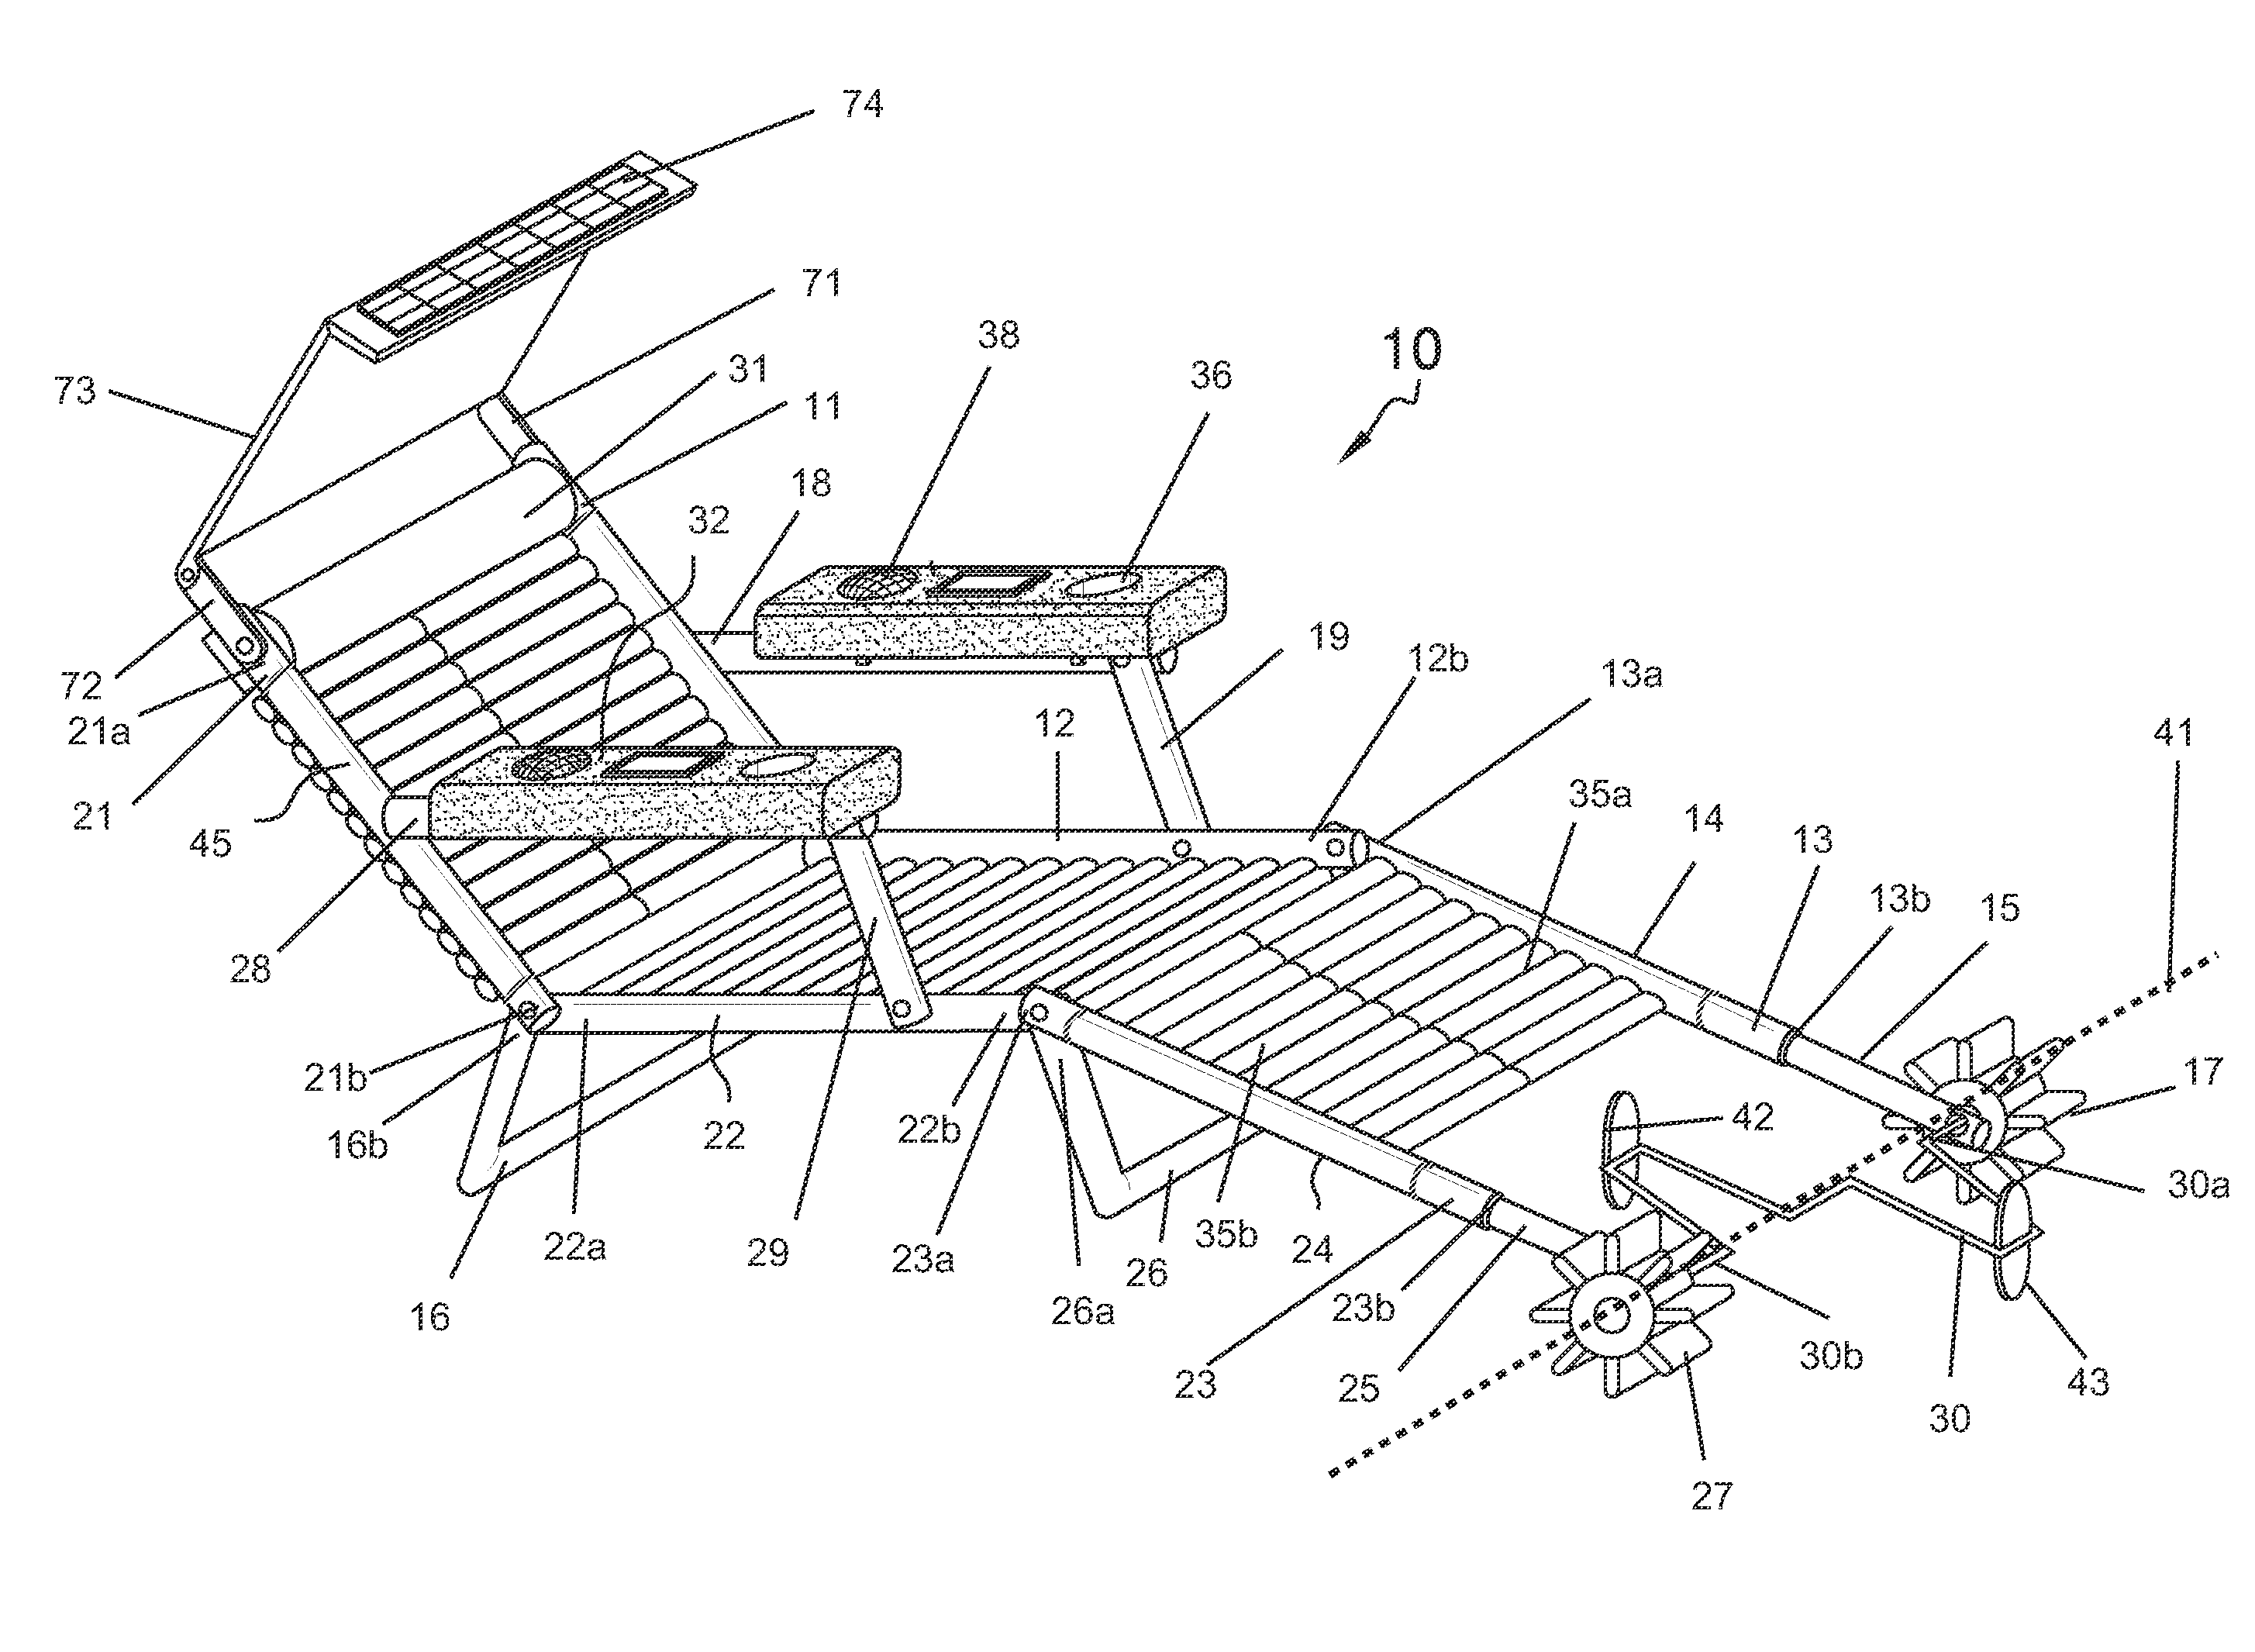 Submergible support and seating apparatus